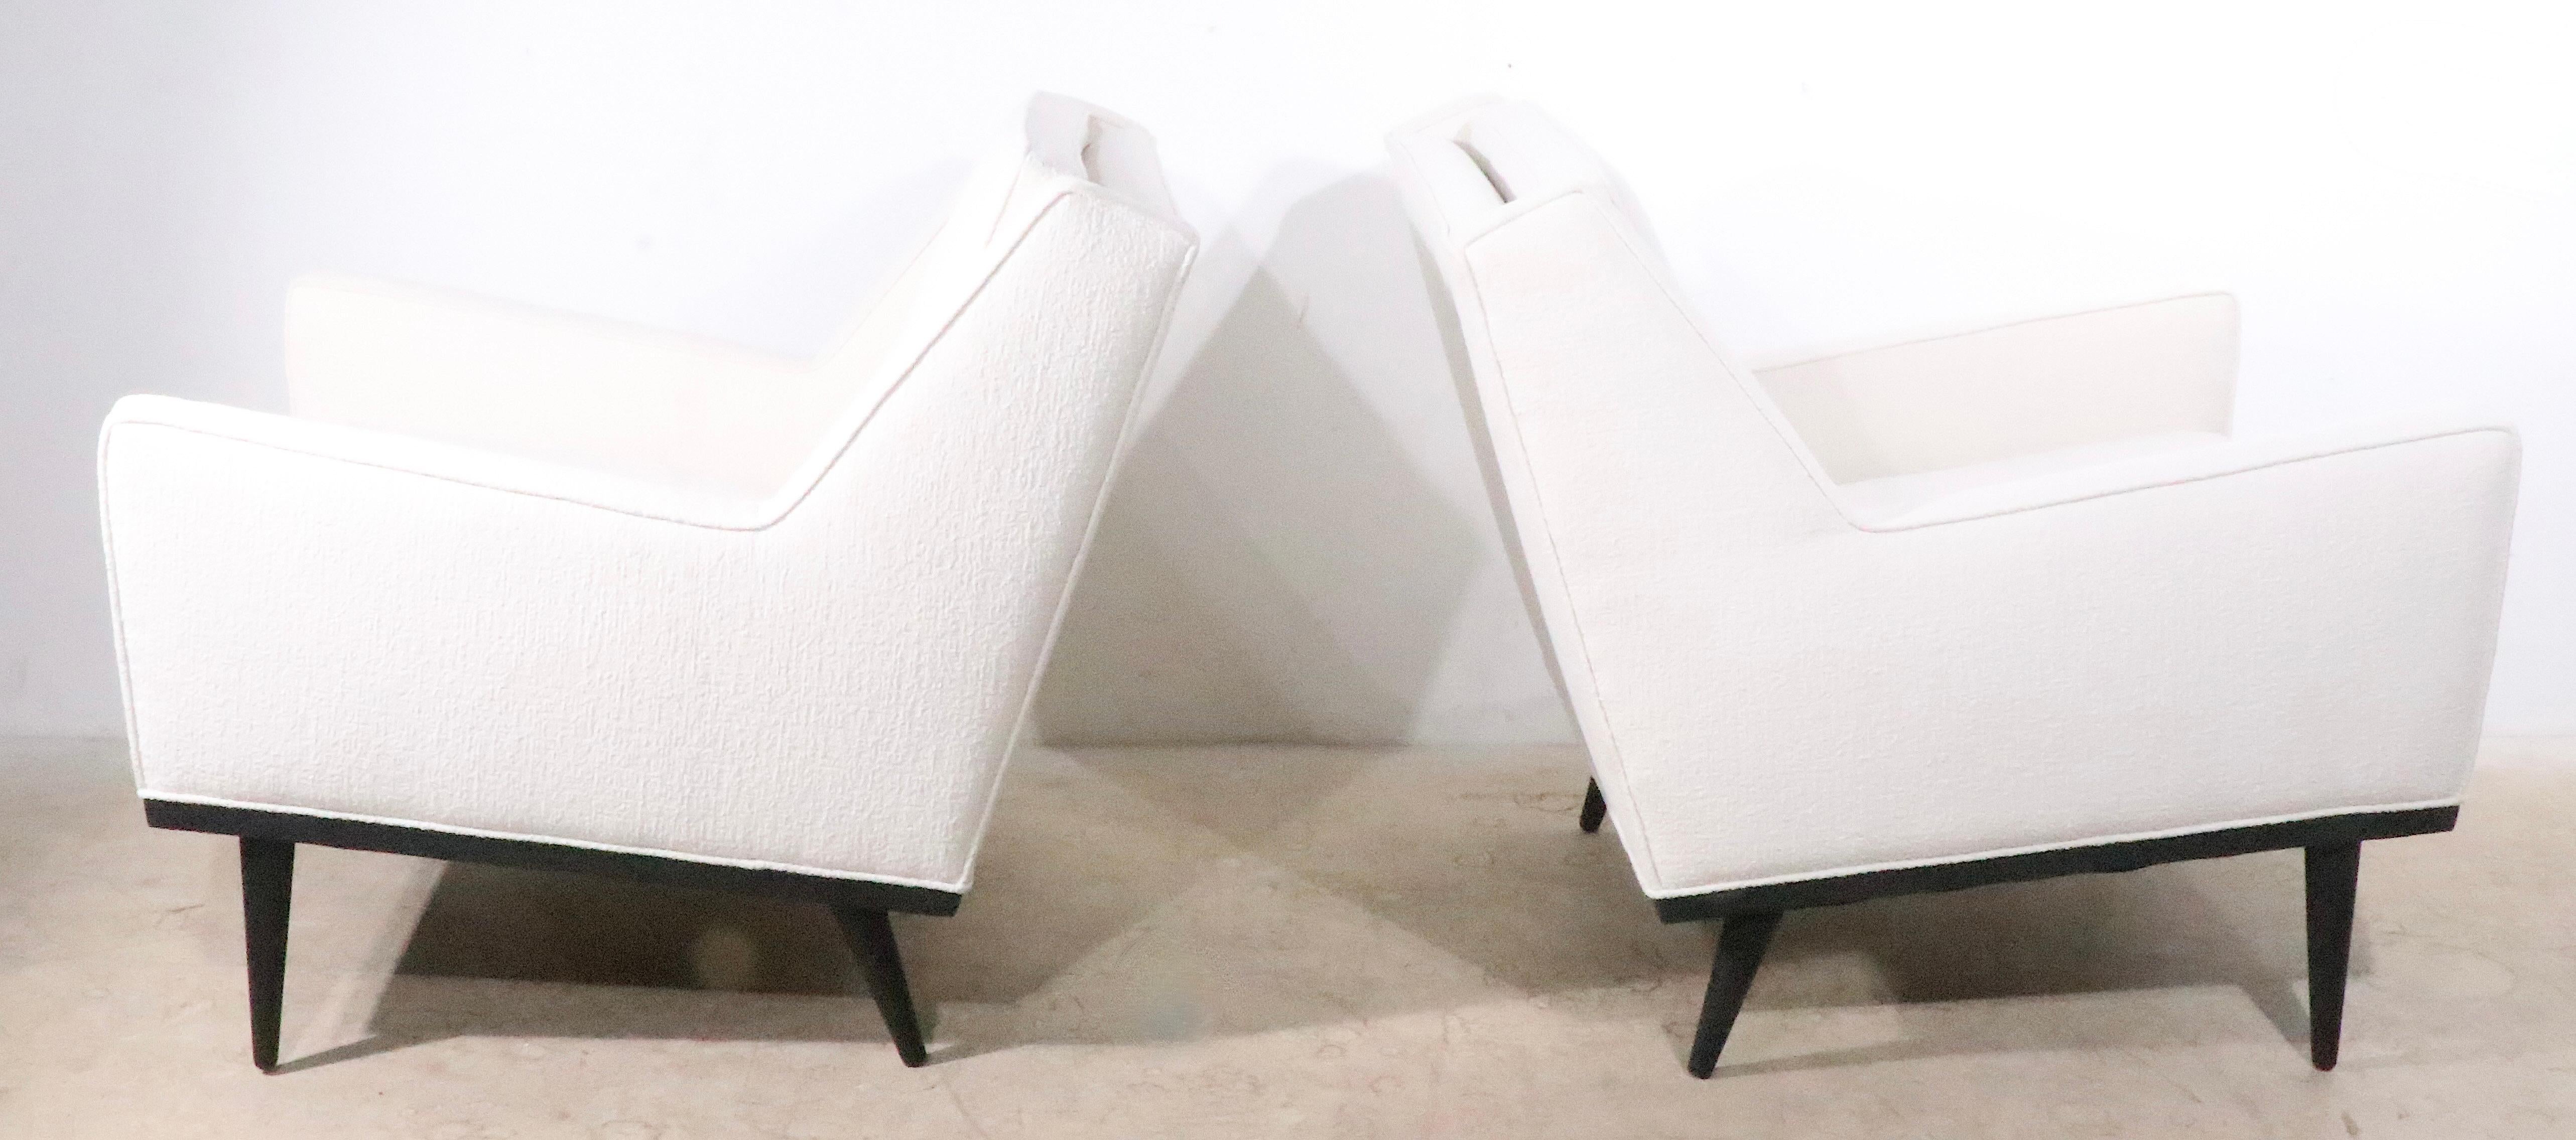 20th Century Pair of Mid Century Lounge Chairs by Baughman for James Inc. C. 1950s For Sale